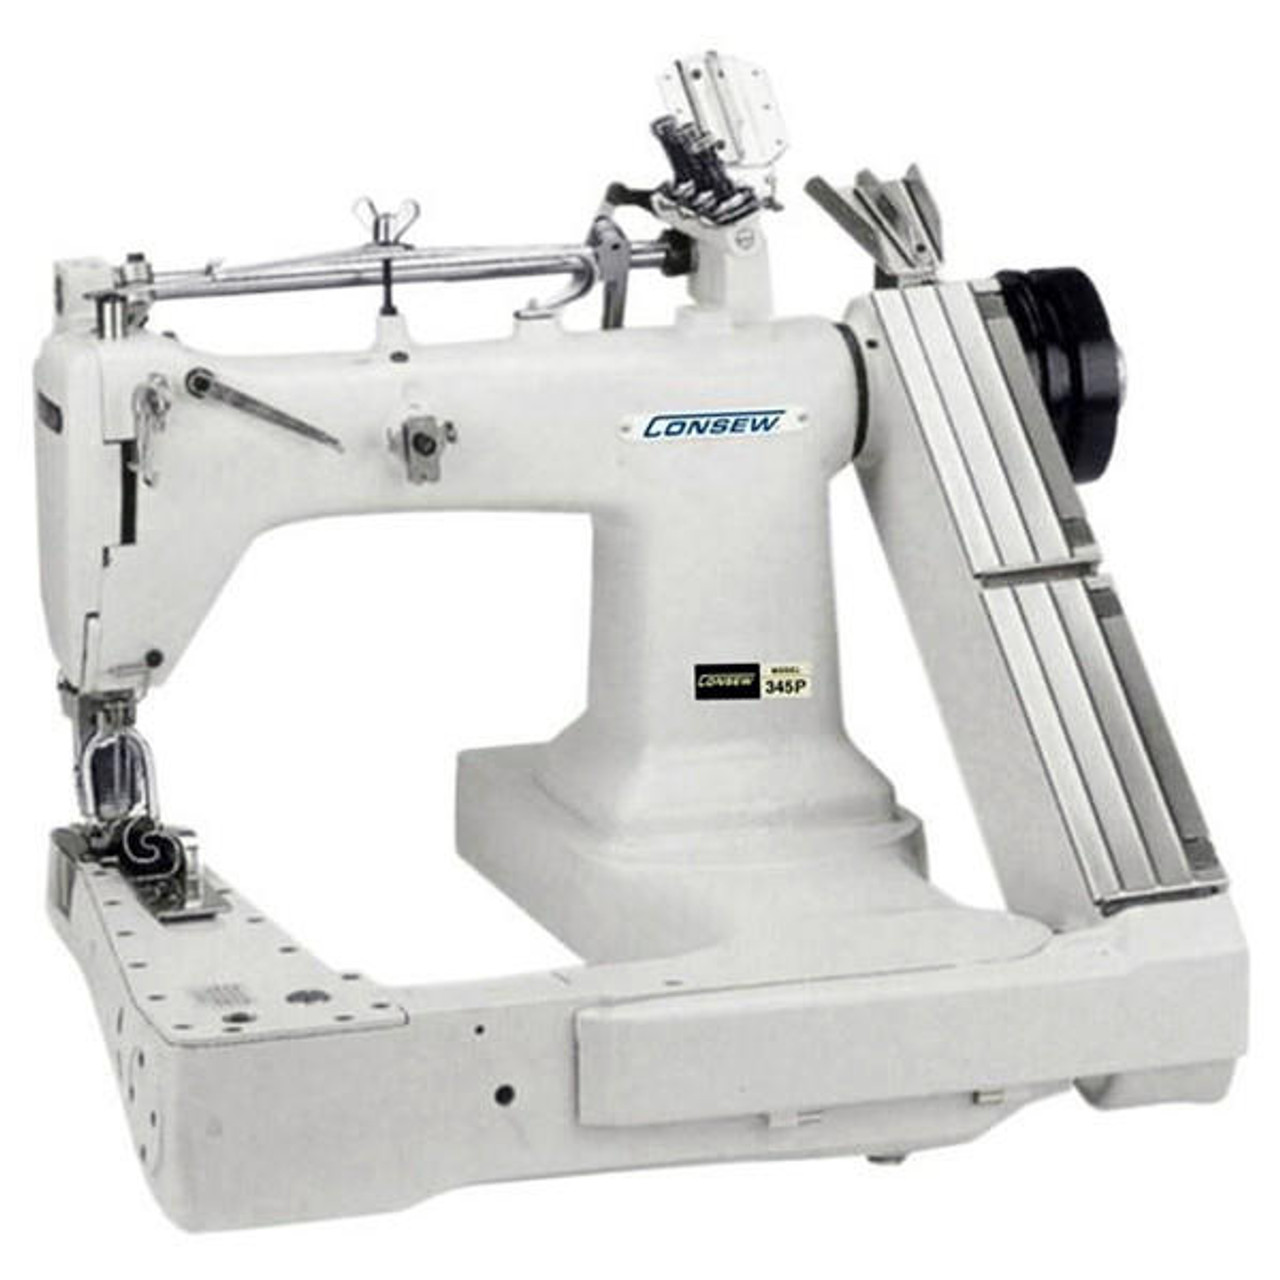 Consew 345-3 Double Chainstitch Feed-Off-The-Arm Lap Seam Felling Sewing  Machine with Space Saver Table and Servo Motor